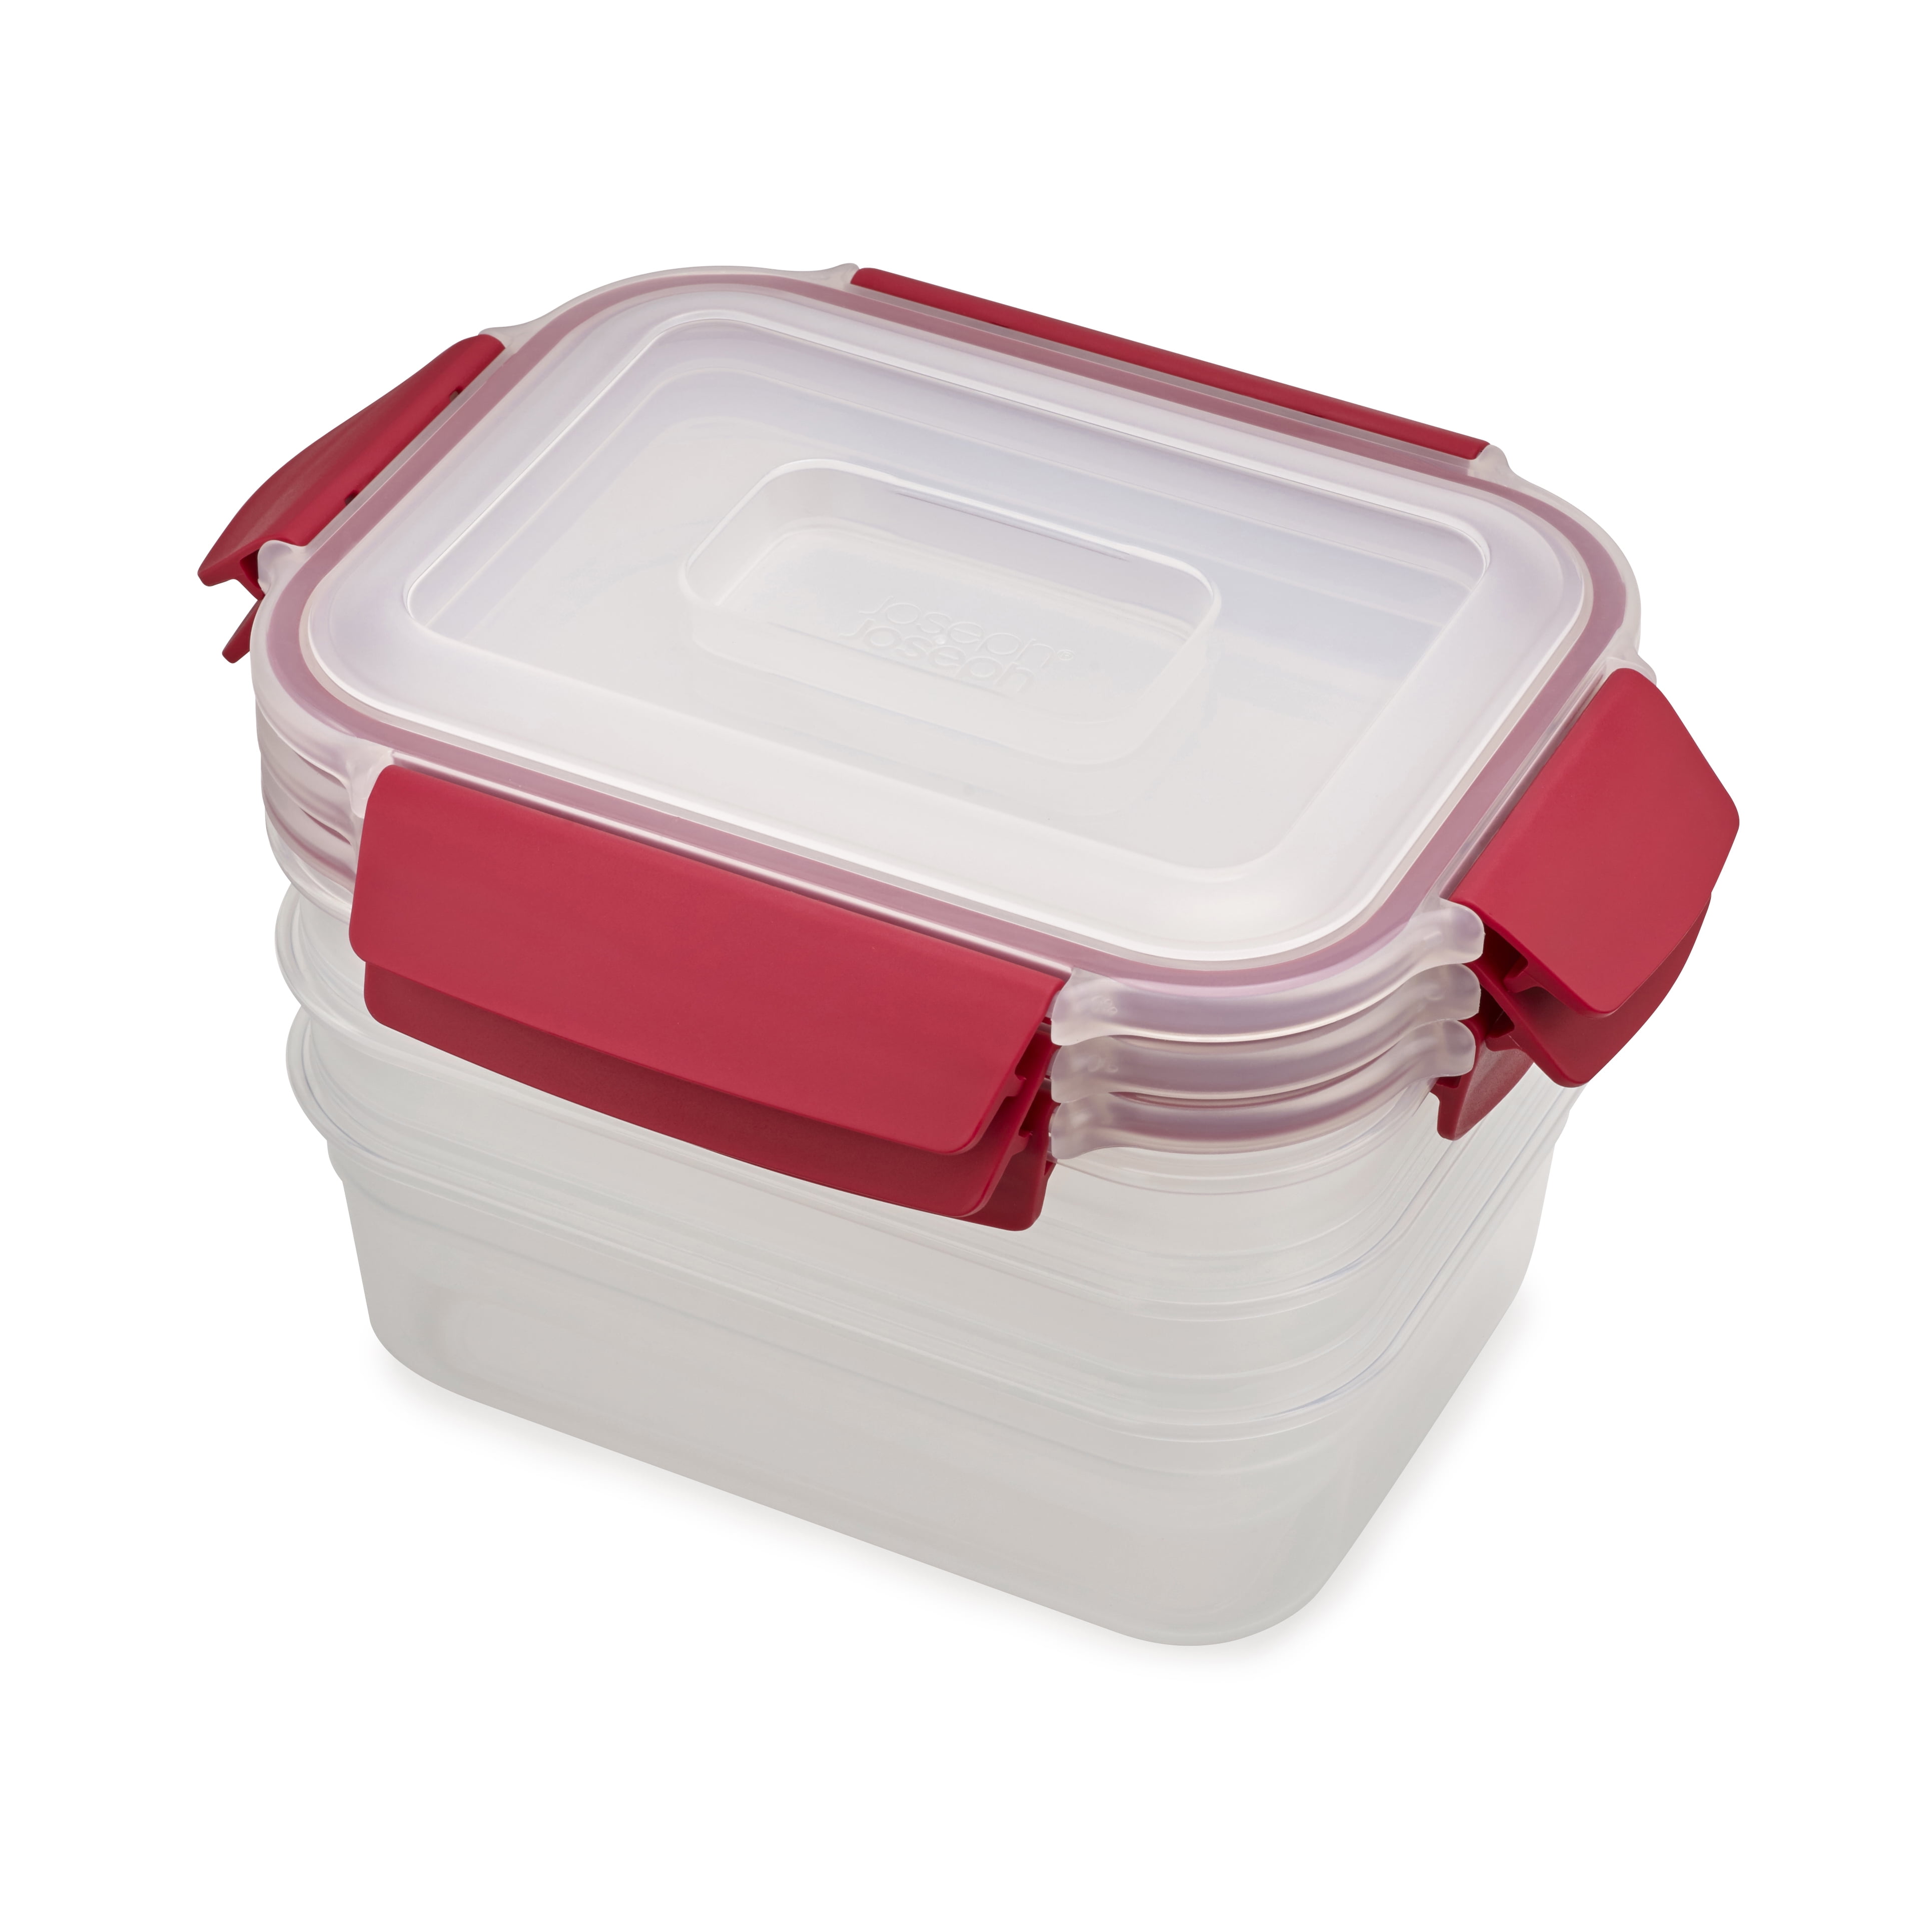 Large Airtight Food Storage Containers With Lids 6 Piece Set Leak proof BPA Free 